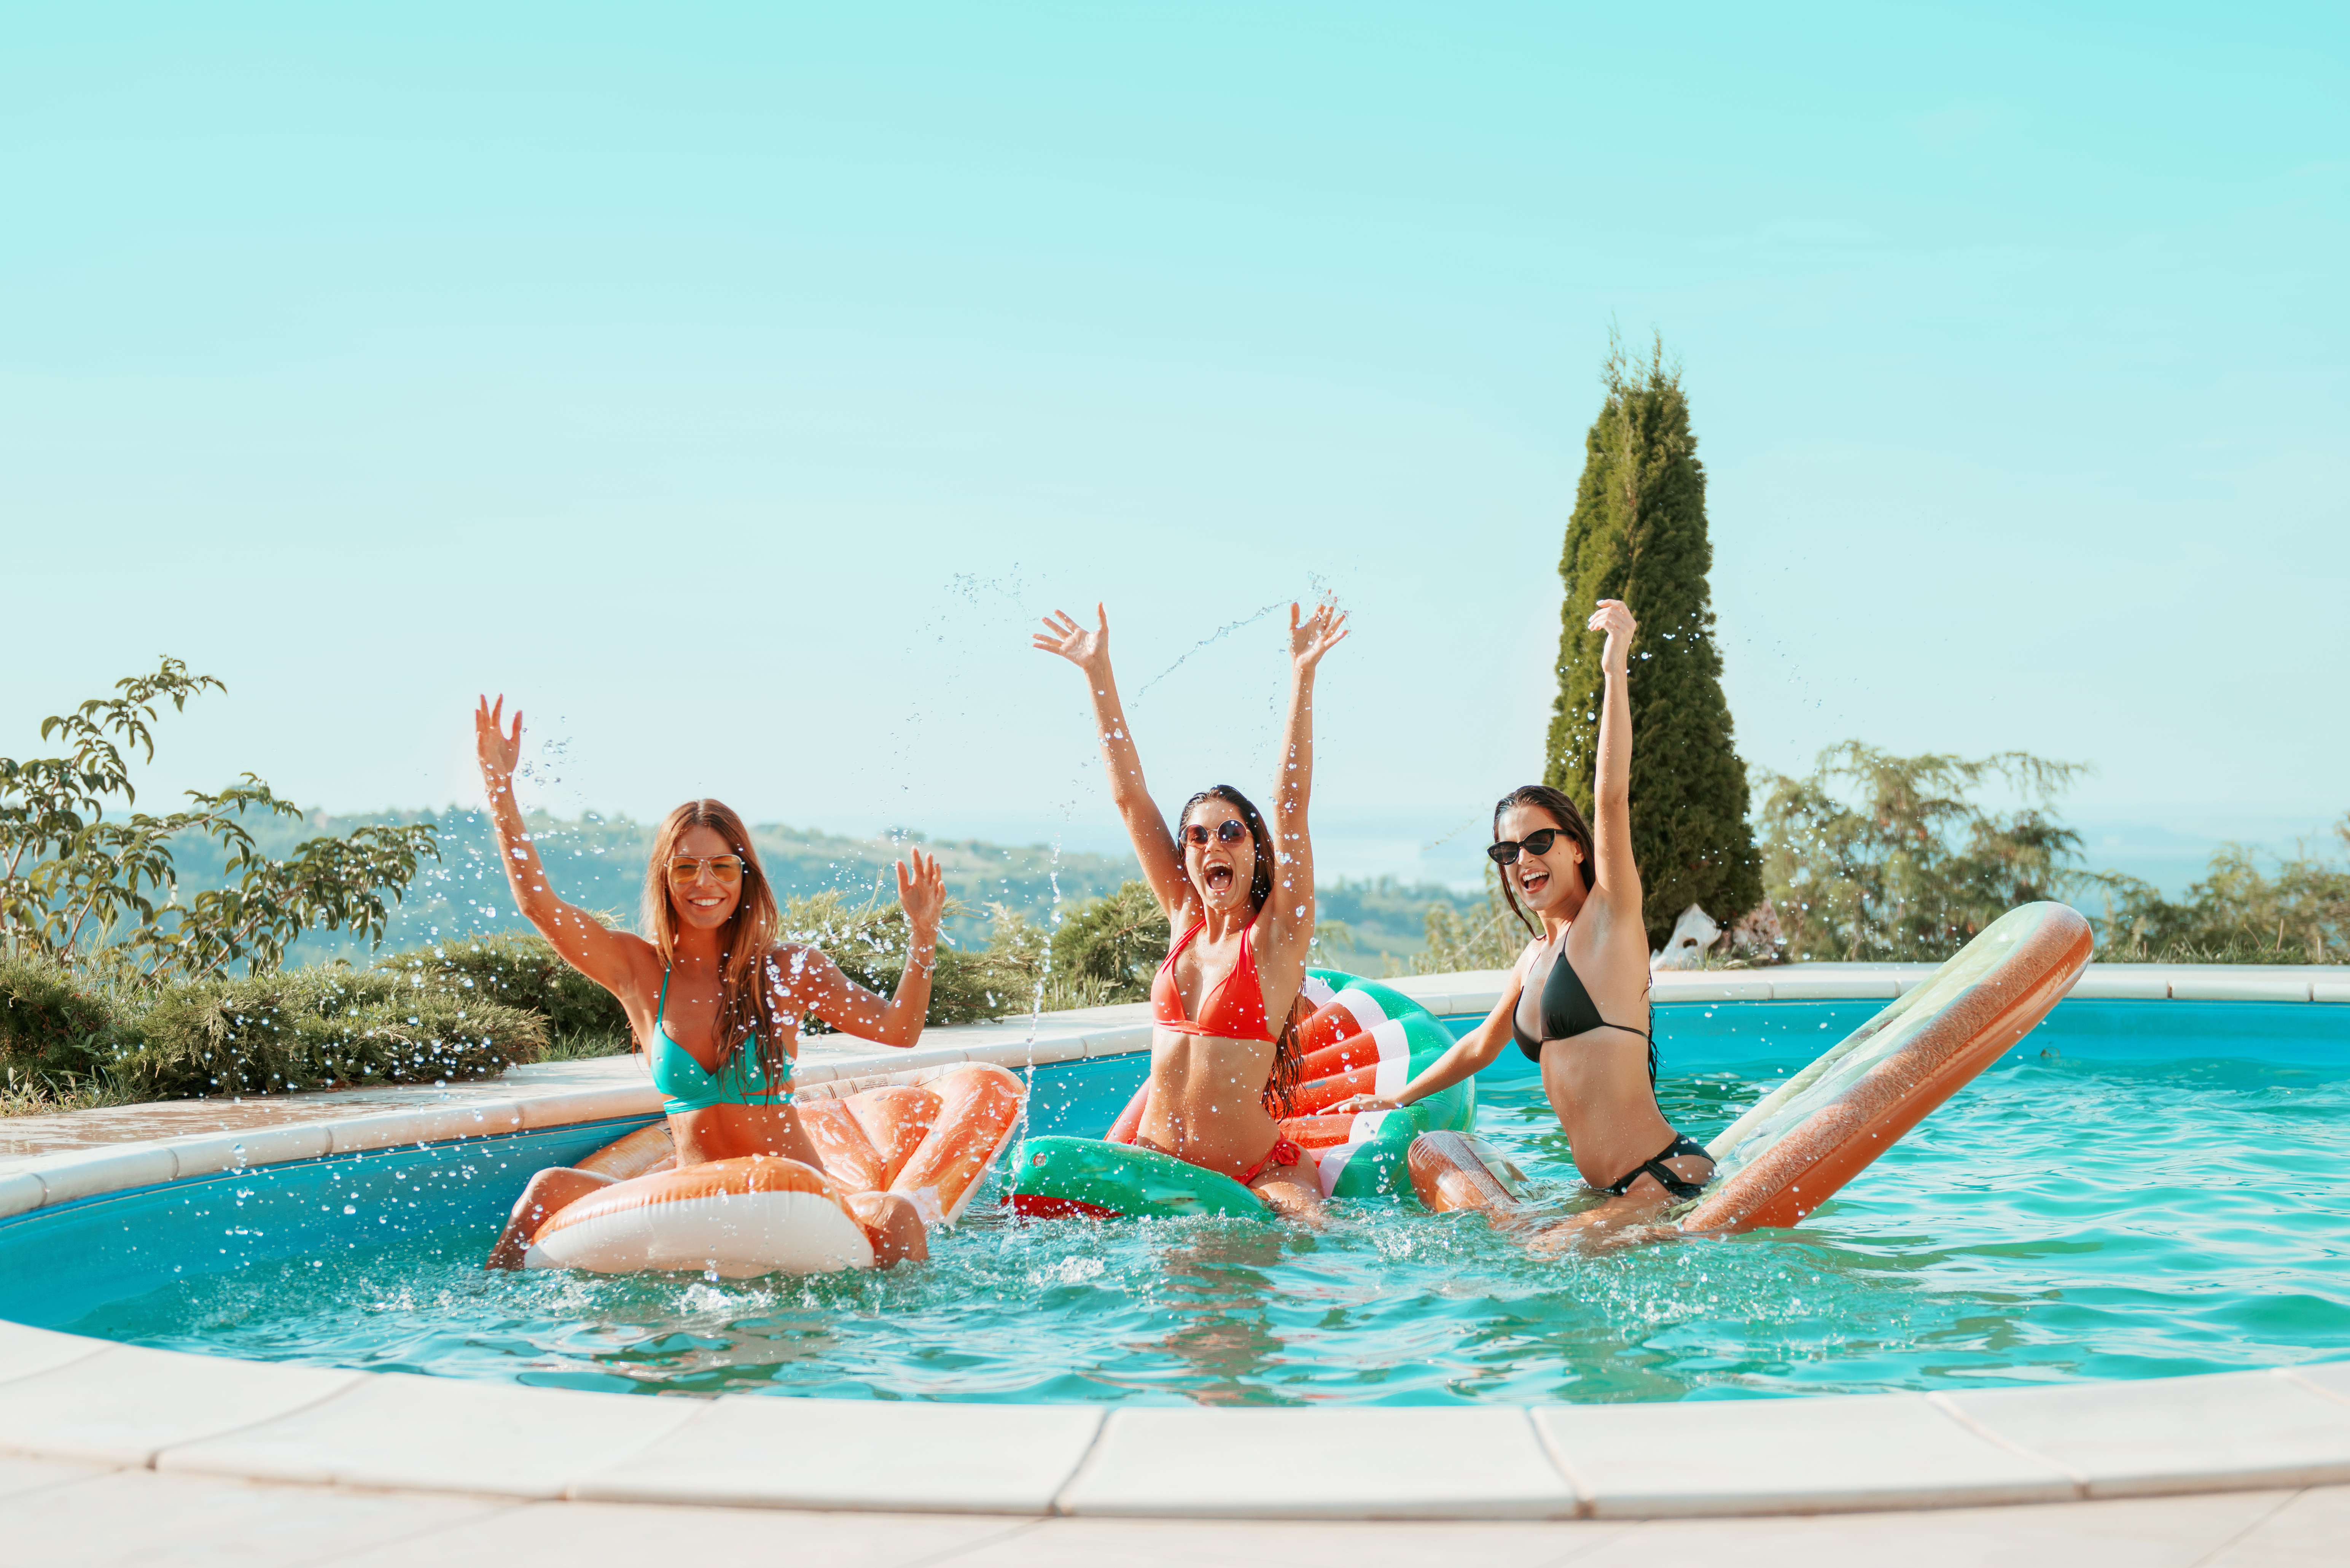 Shapermint - Level up your pool party experience with these swim